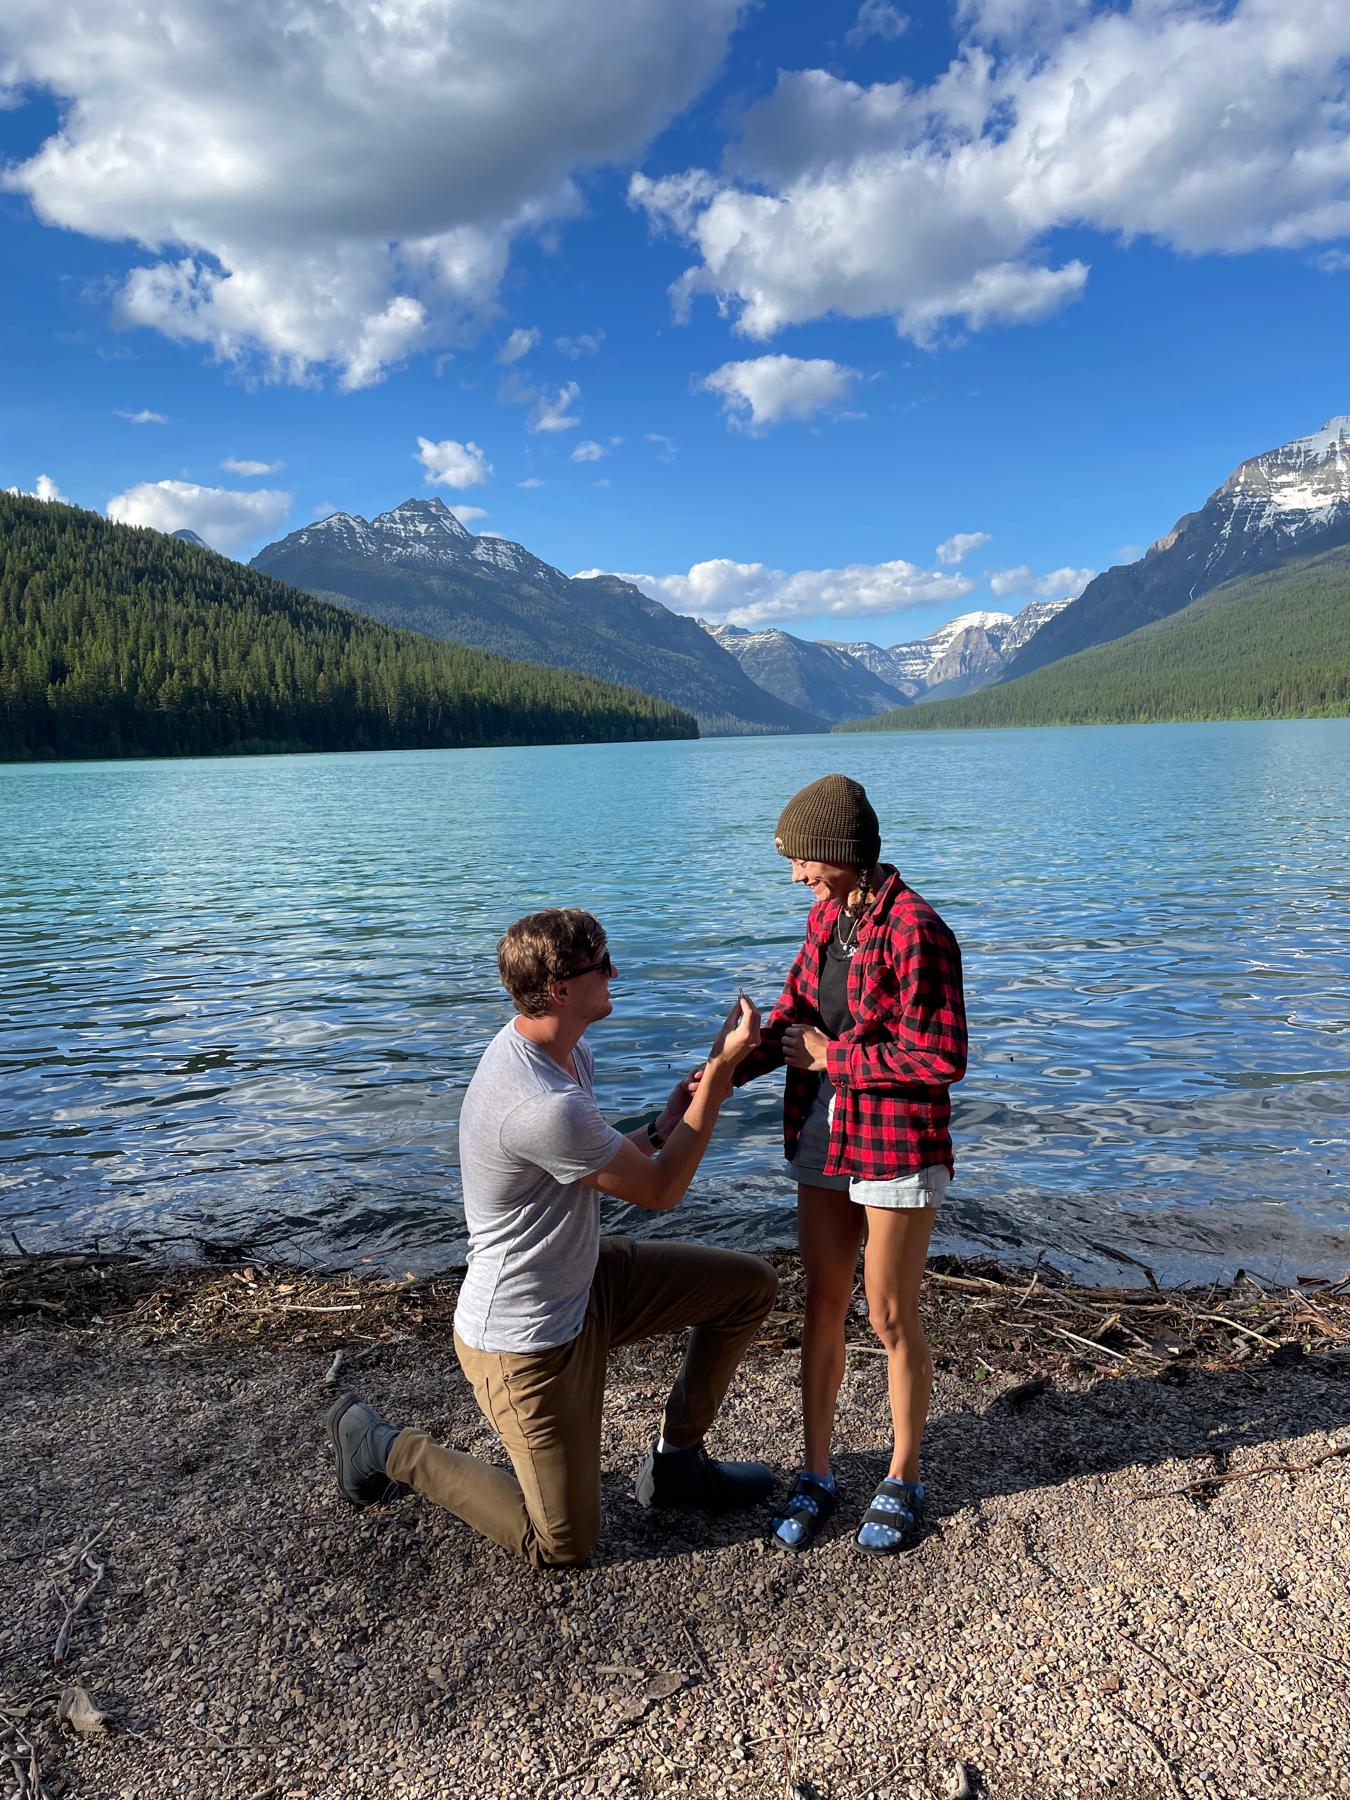 Tyler surprised Kiana by proposing at Glacier National Park on June 25, 2022. Kiana has no regrets about her fashion choices that day!